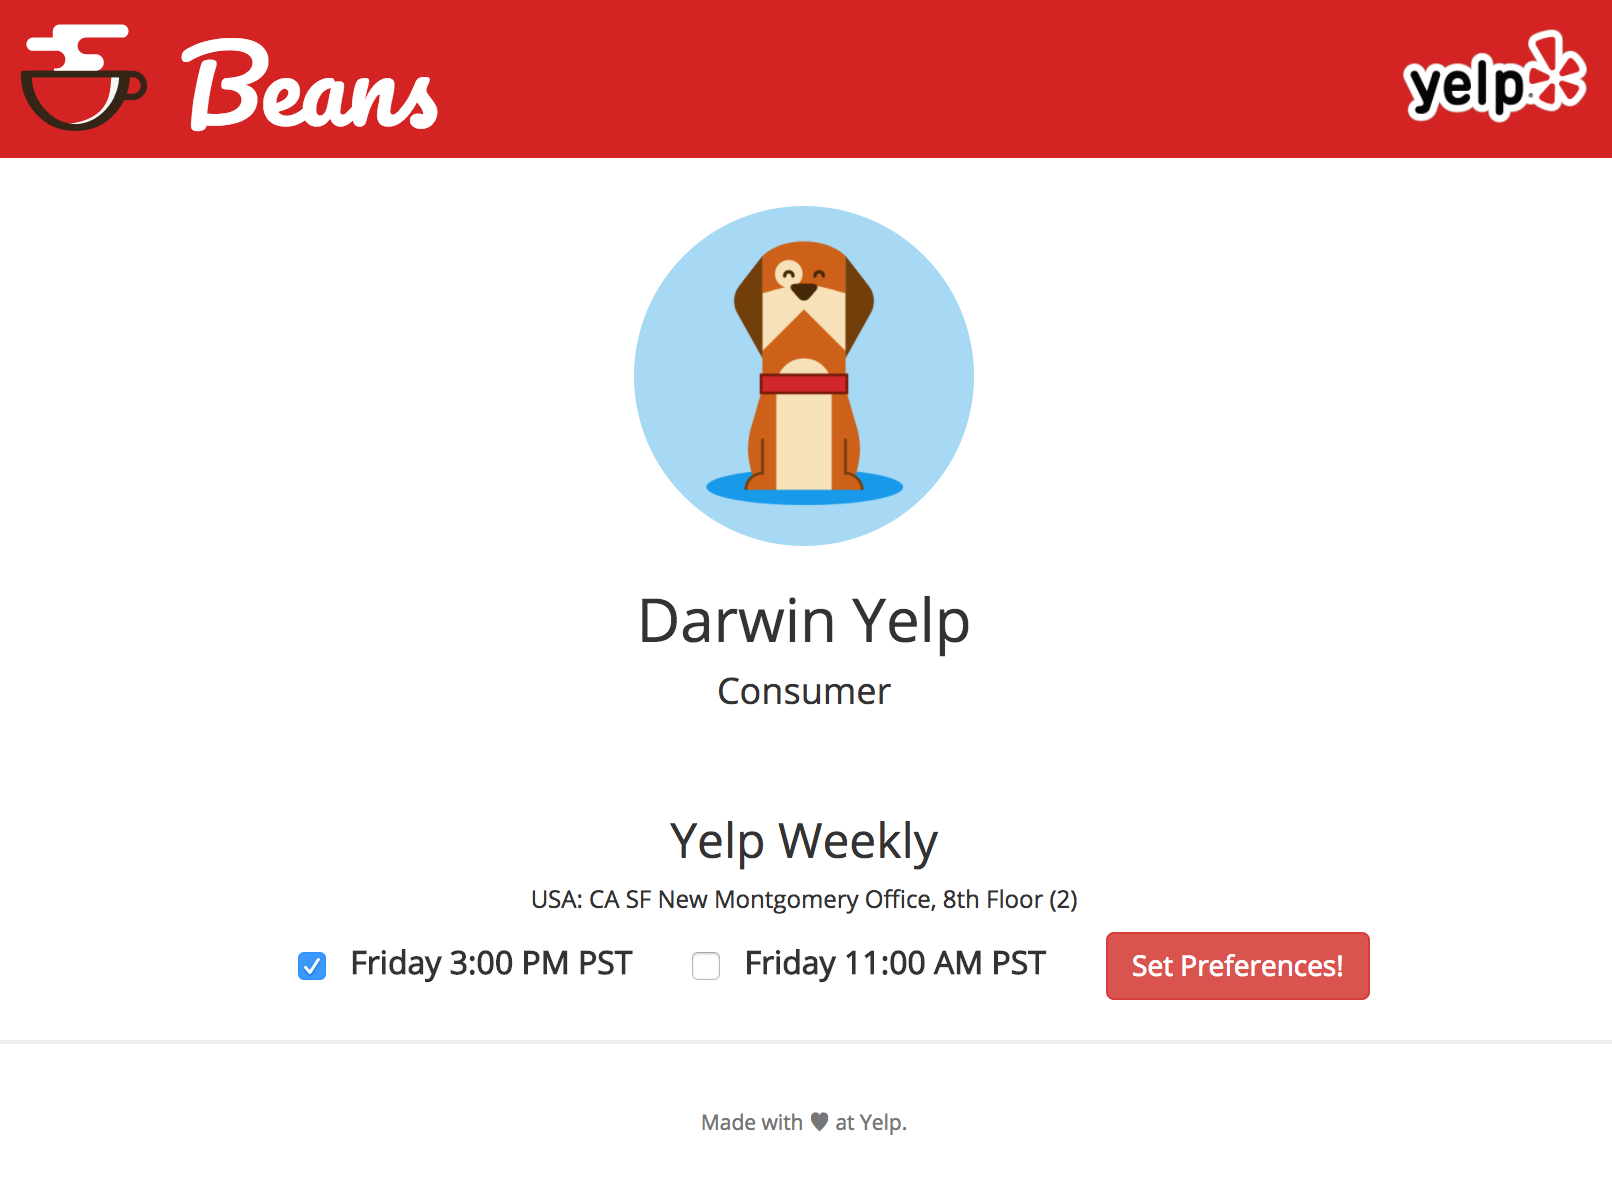 A screenshot of the Yelp Beans app